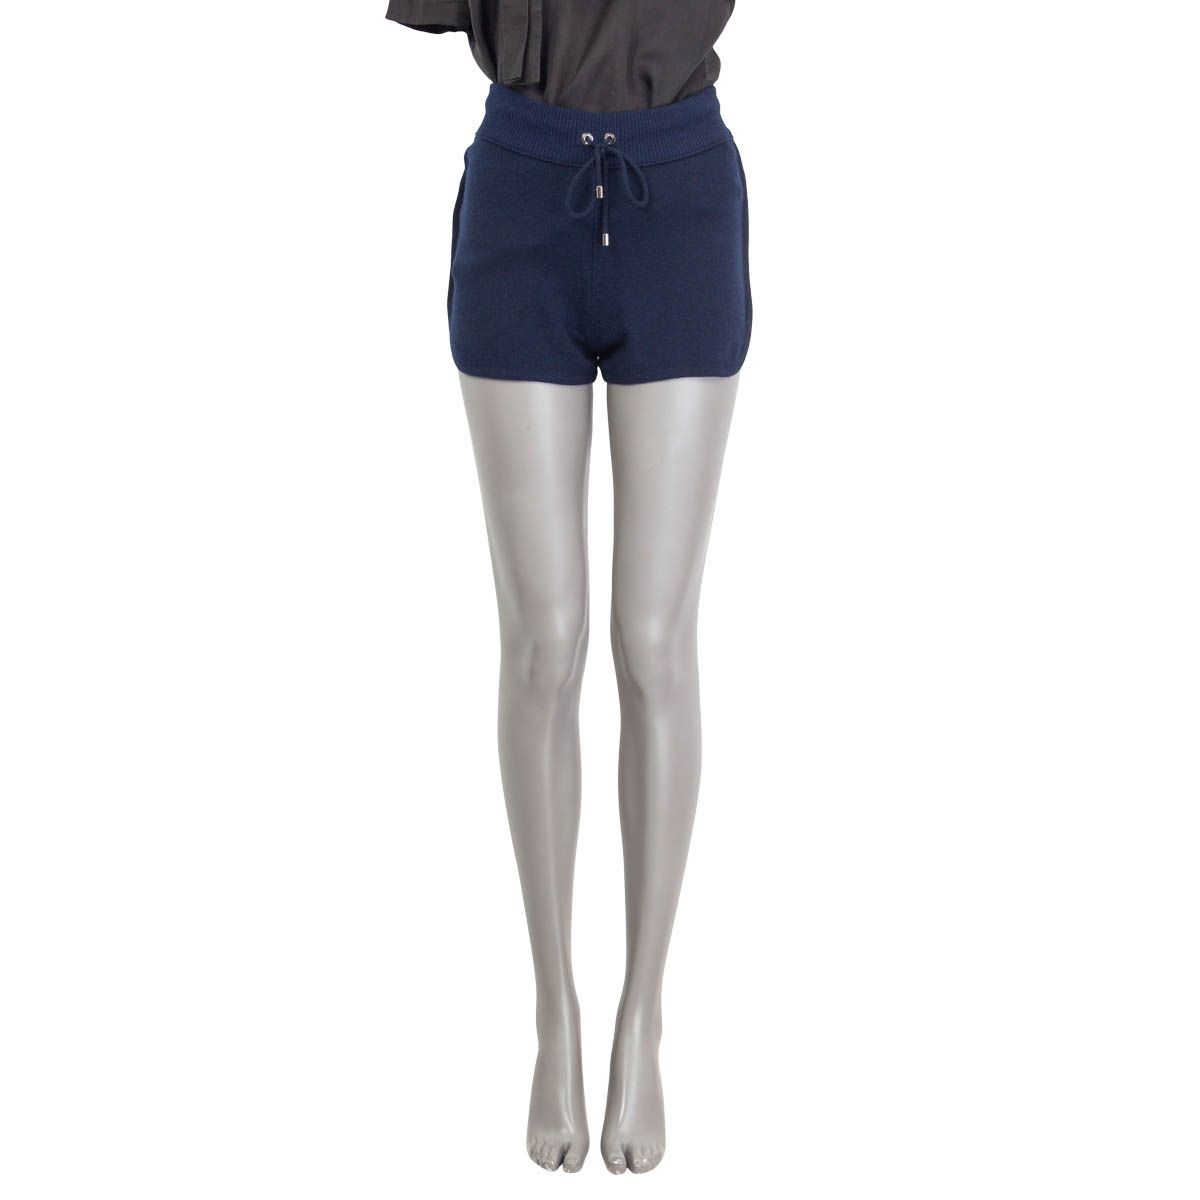 Chanel 2012 Cashmere Shorts Navy Blue